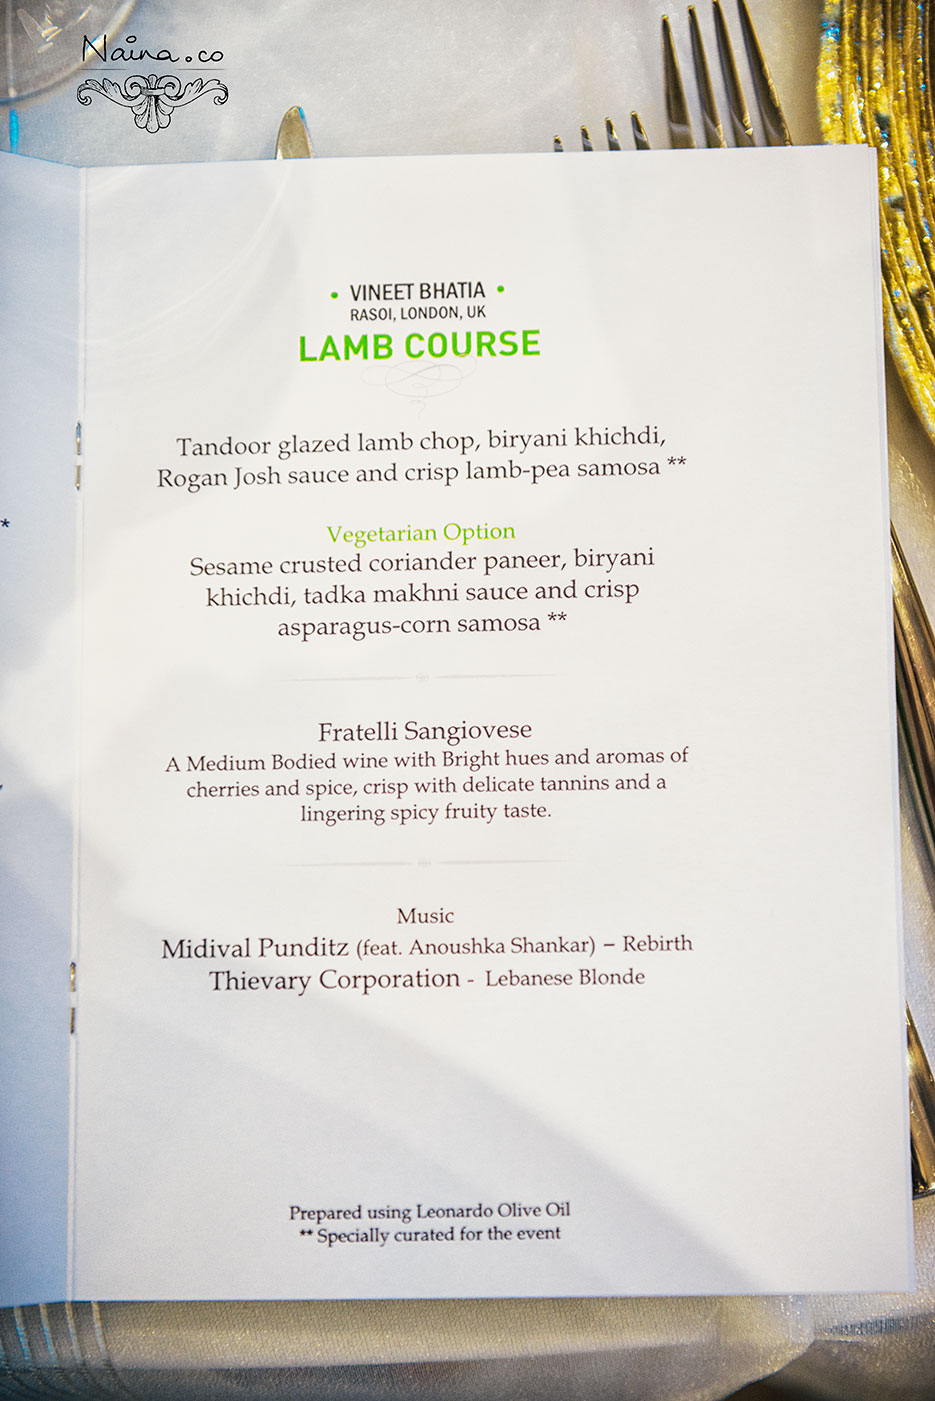 Menu by Michelin Star Chefs for the CSSG Gastronomy Summit 2012, New Delhi, India. Laurie Gear, Ian Curley, Vineet Bhatia, Frances Atkins, Marcello Tully, Anjum Anand. Food Photography by photographer Naina Redhu of Naina.co